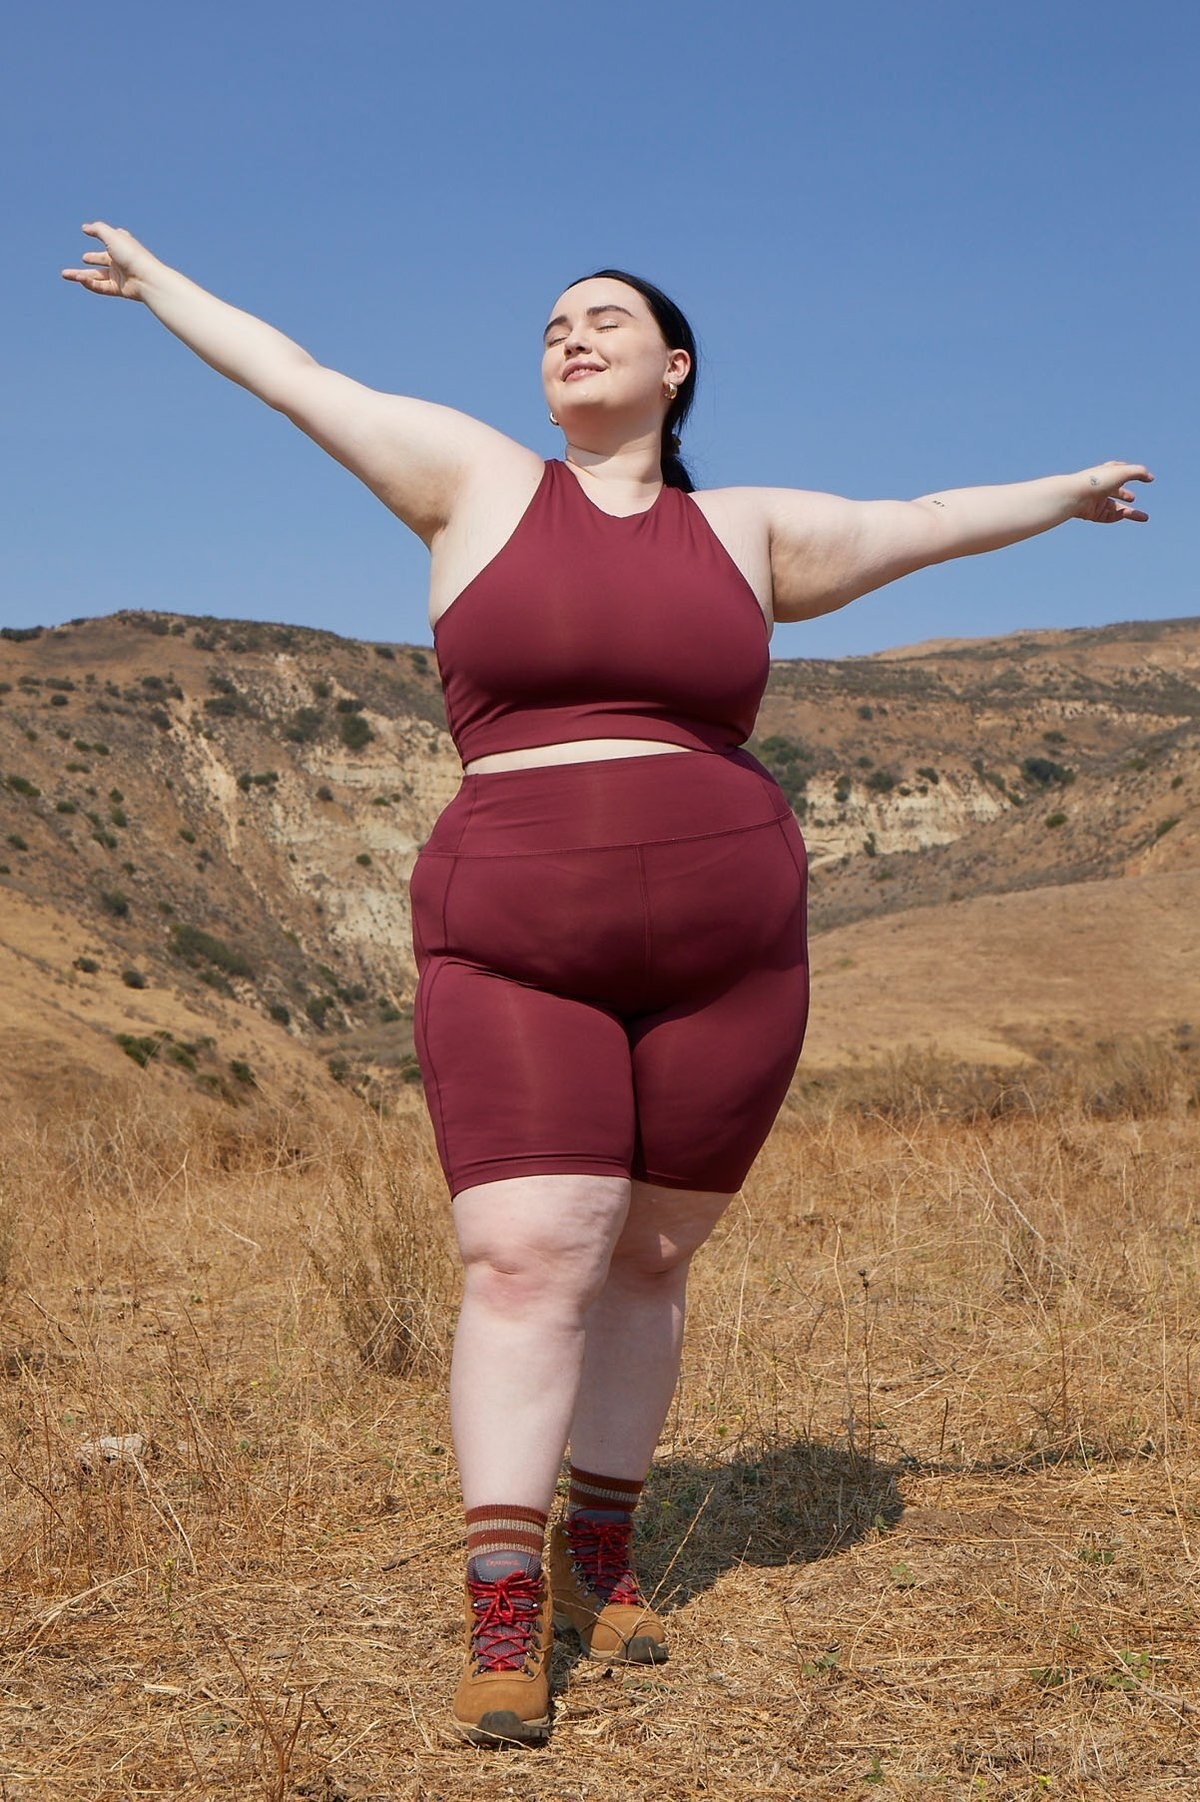 Model wears high-rise dark red bike shorts with a matching sports bra and brown hiking booties